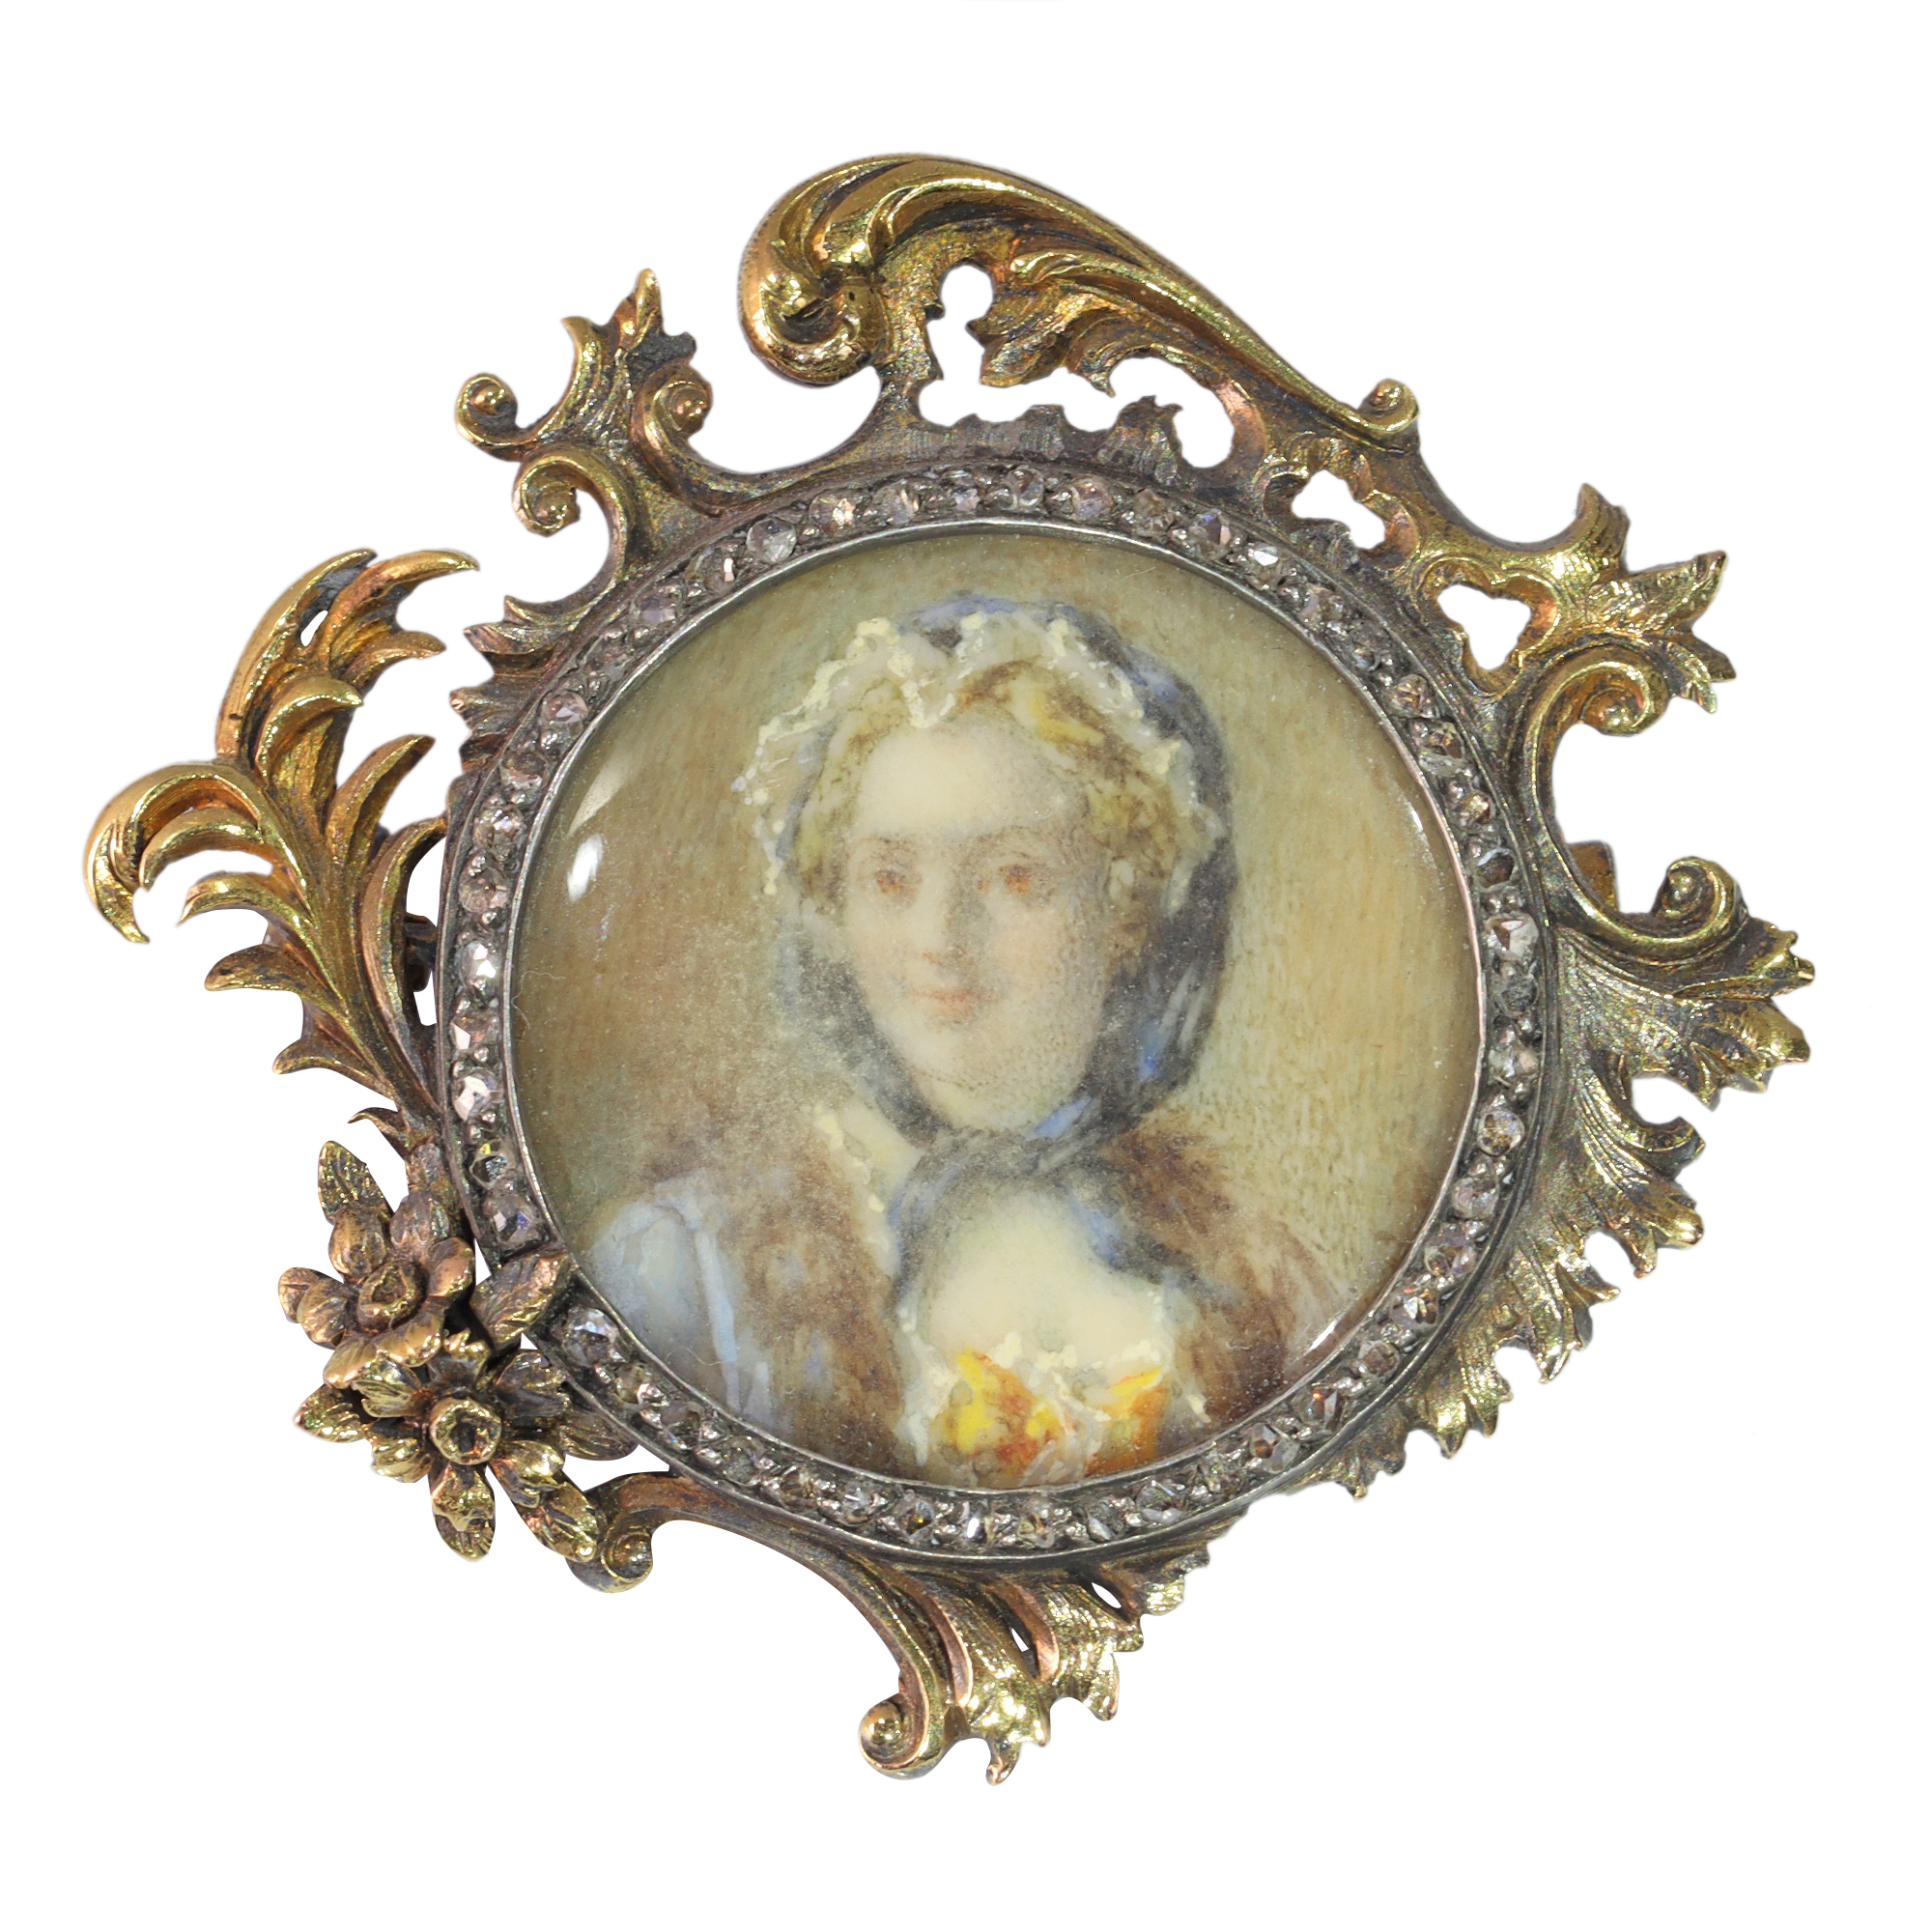 Antique Gold Brooch Allure: Pompadour's Legacy in Victorian Jewellery